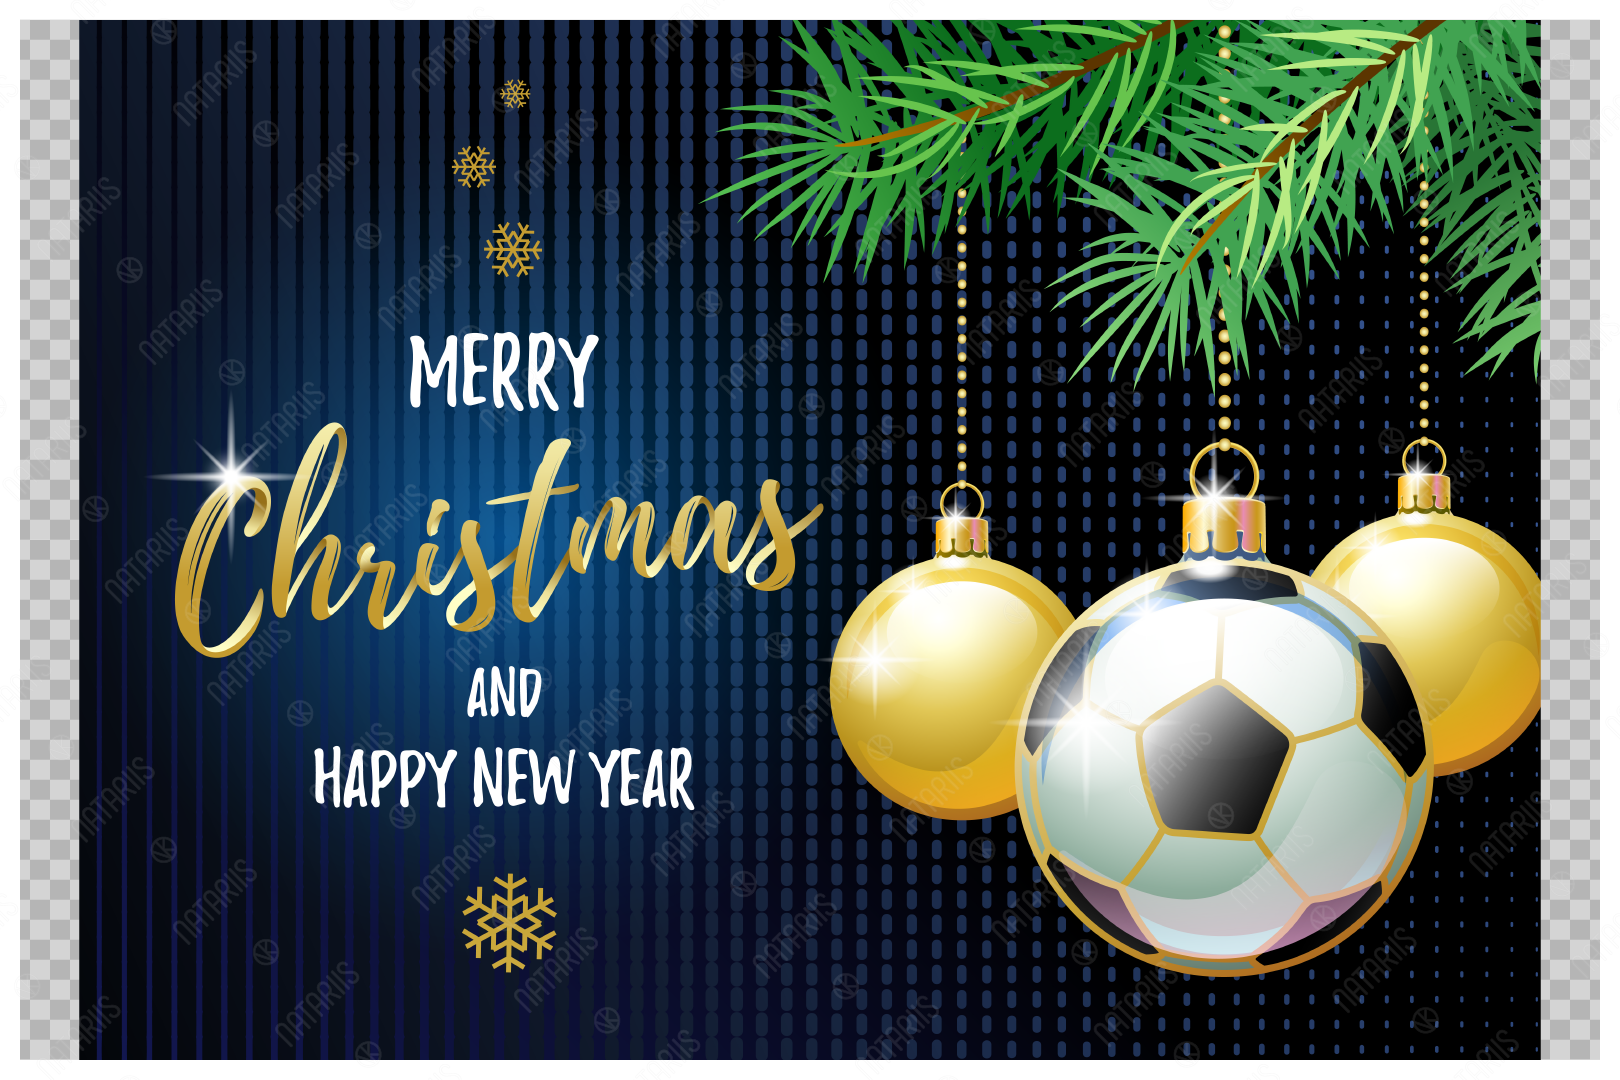 Merry Christmas and Happy New Year. Soccer. By Natariis Studio